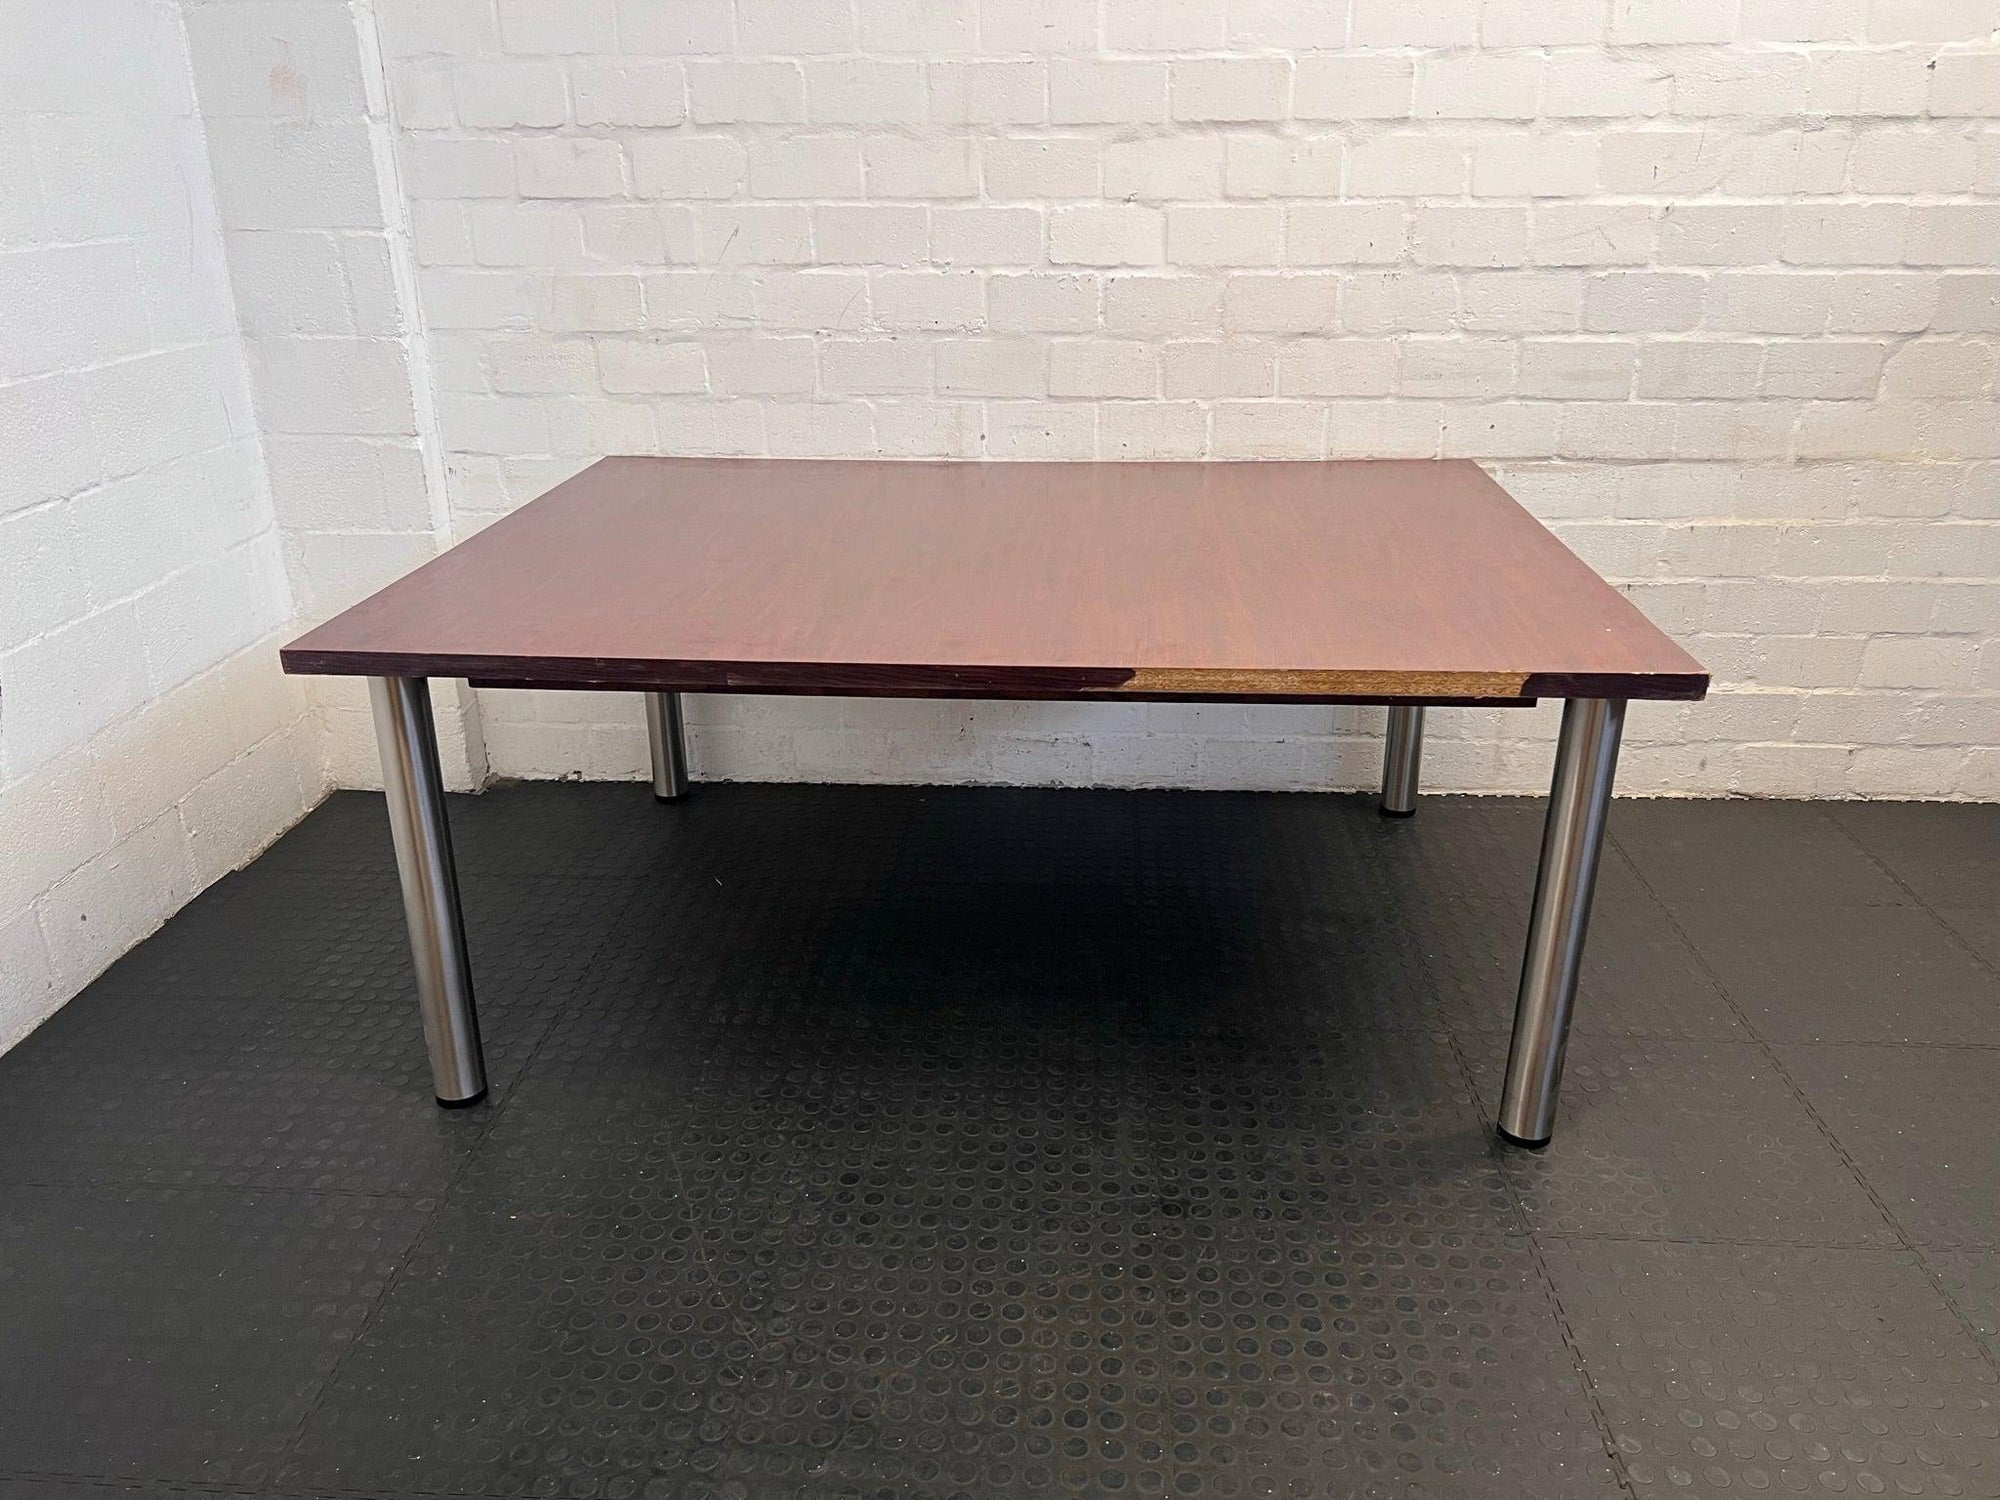 Silver-Legged Oak Boardroom Table (Some Chipping To The Sides) 180 x 135cm - REDUCED